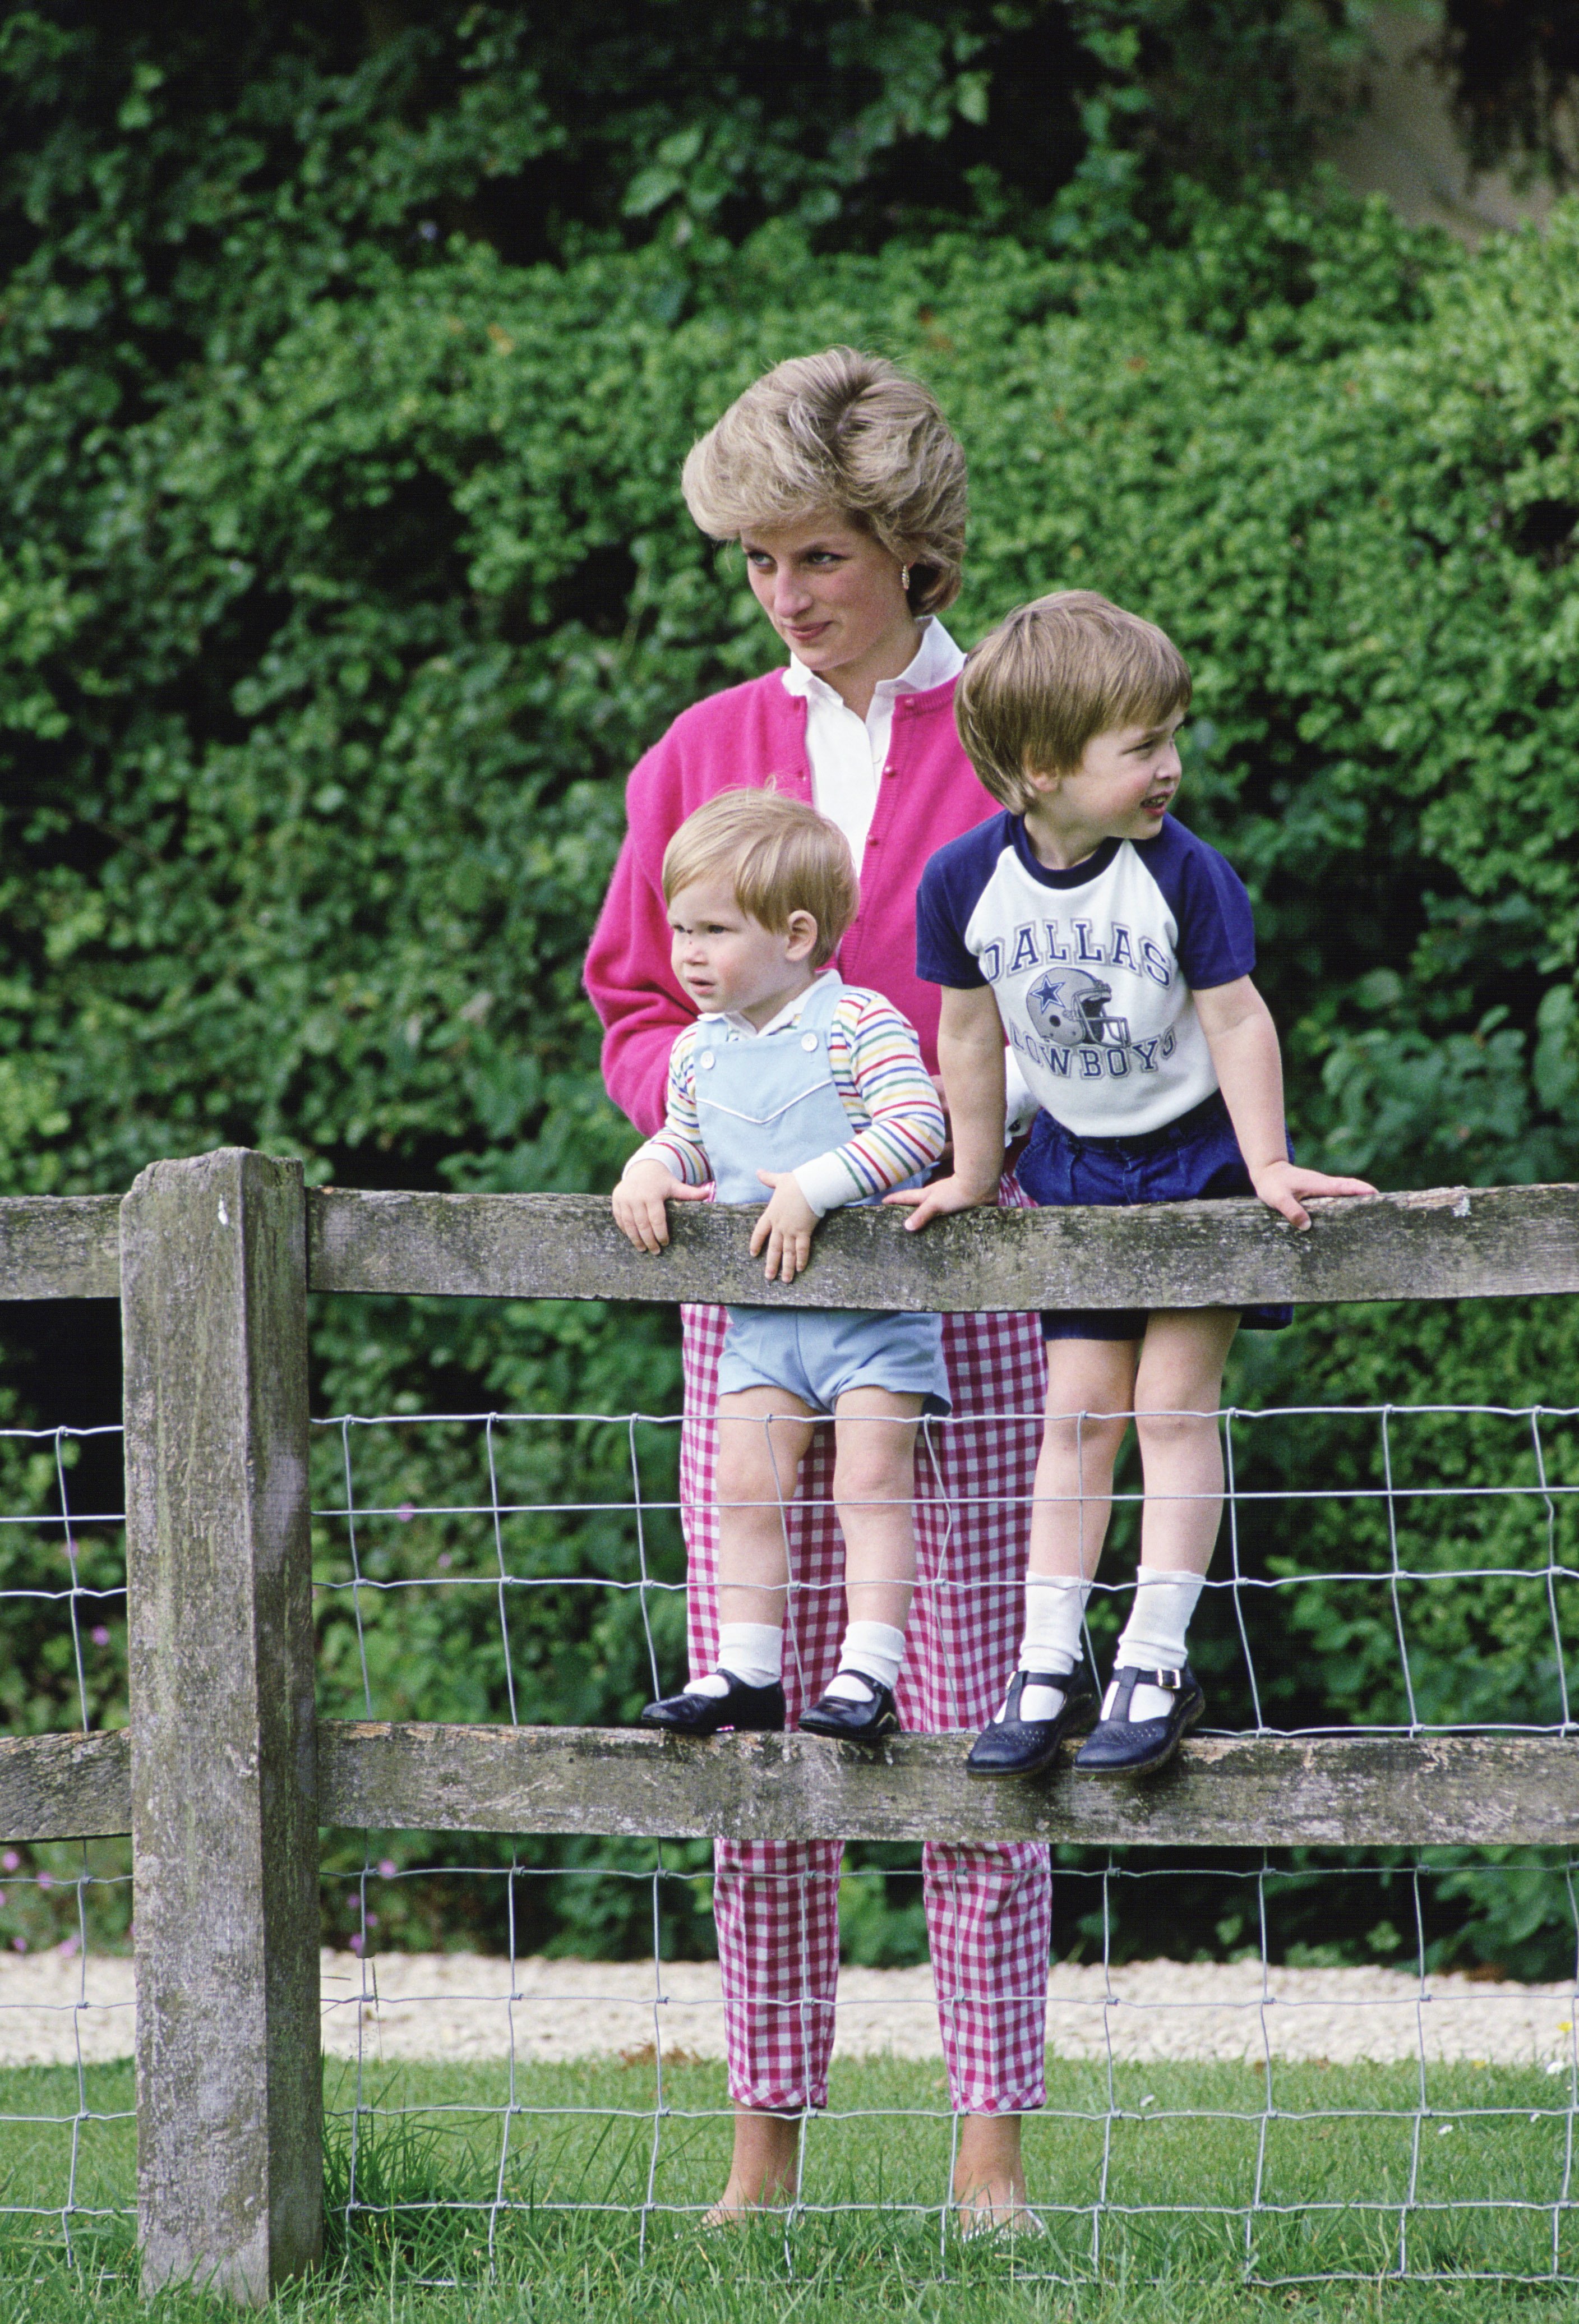 Diana, Princess of Wales with her sons, Prince William and Prince Harry at Highgrove in Tetbury, Gloucestershire. / Source: Getty Images